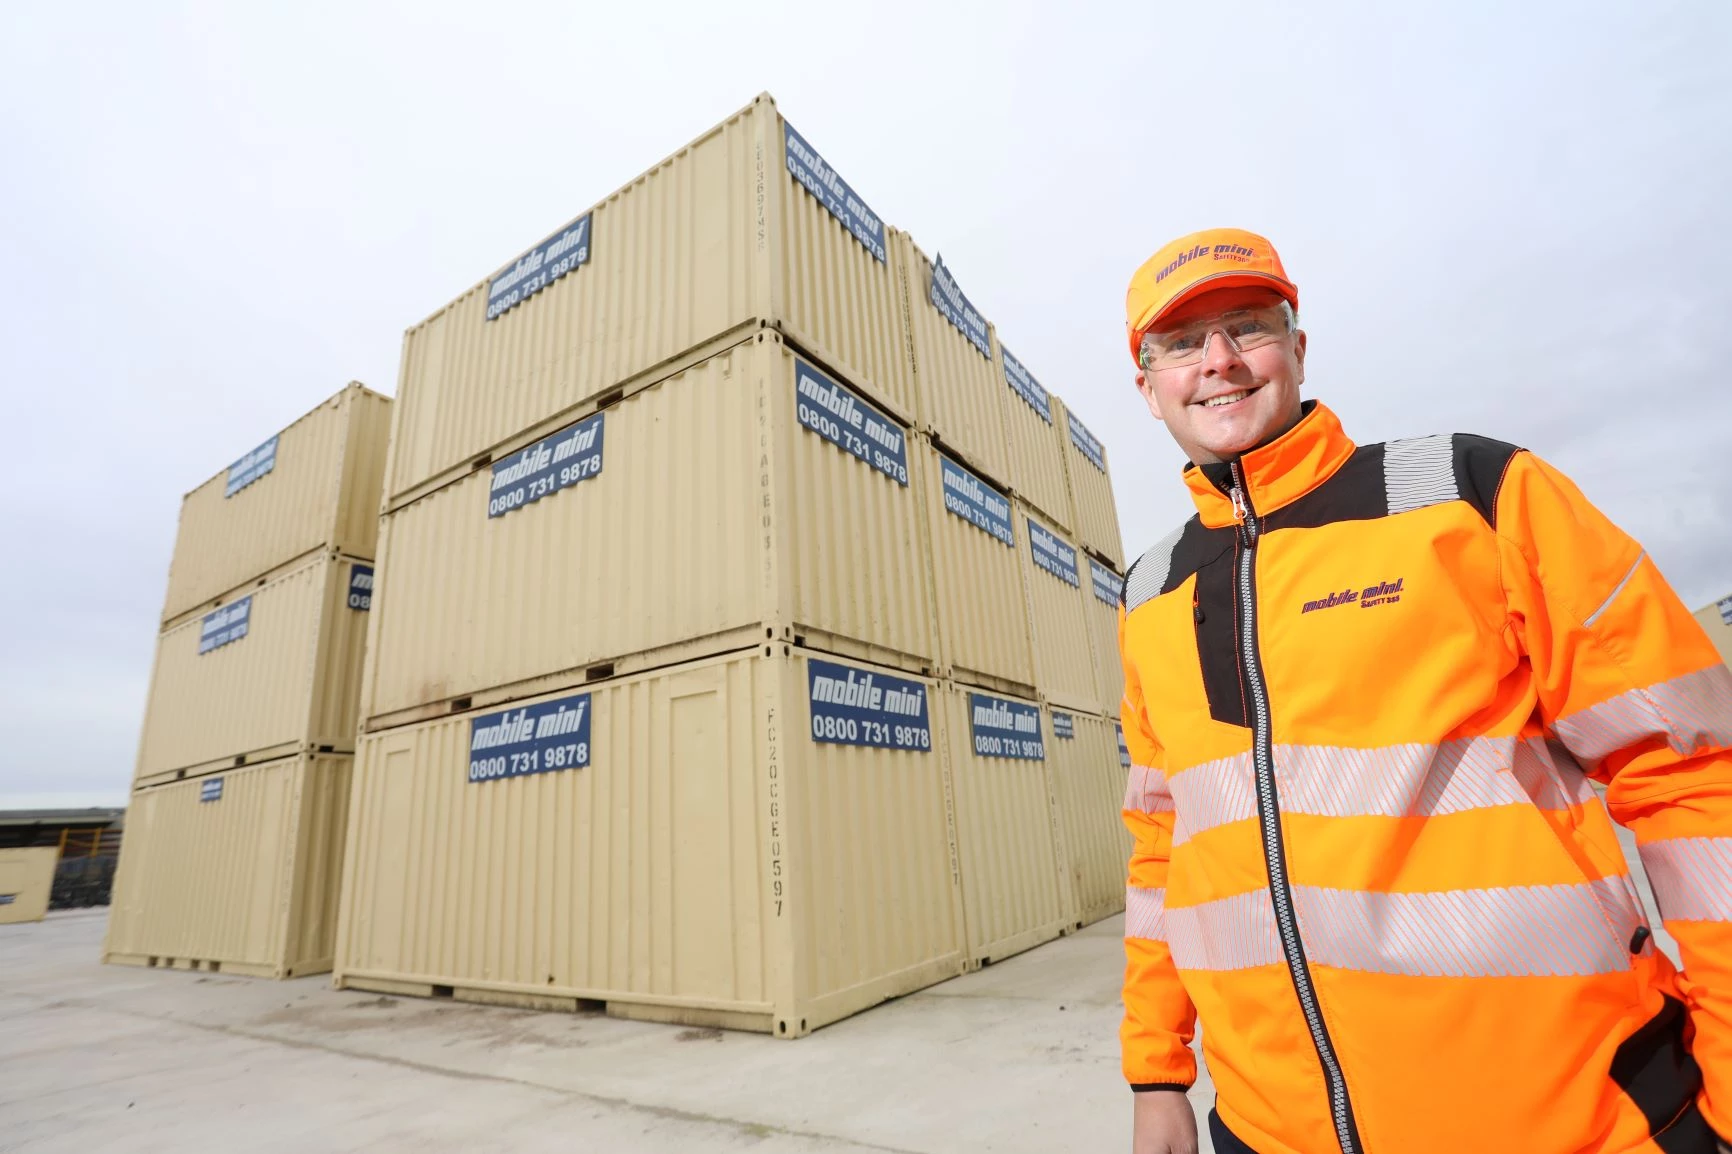 Andrew Thompson has been appointed as the new Managing Director for leading container provider Mobile Mini